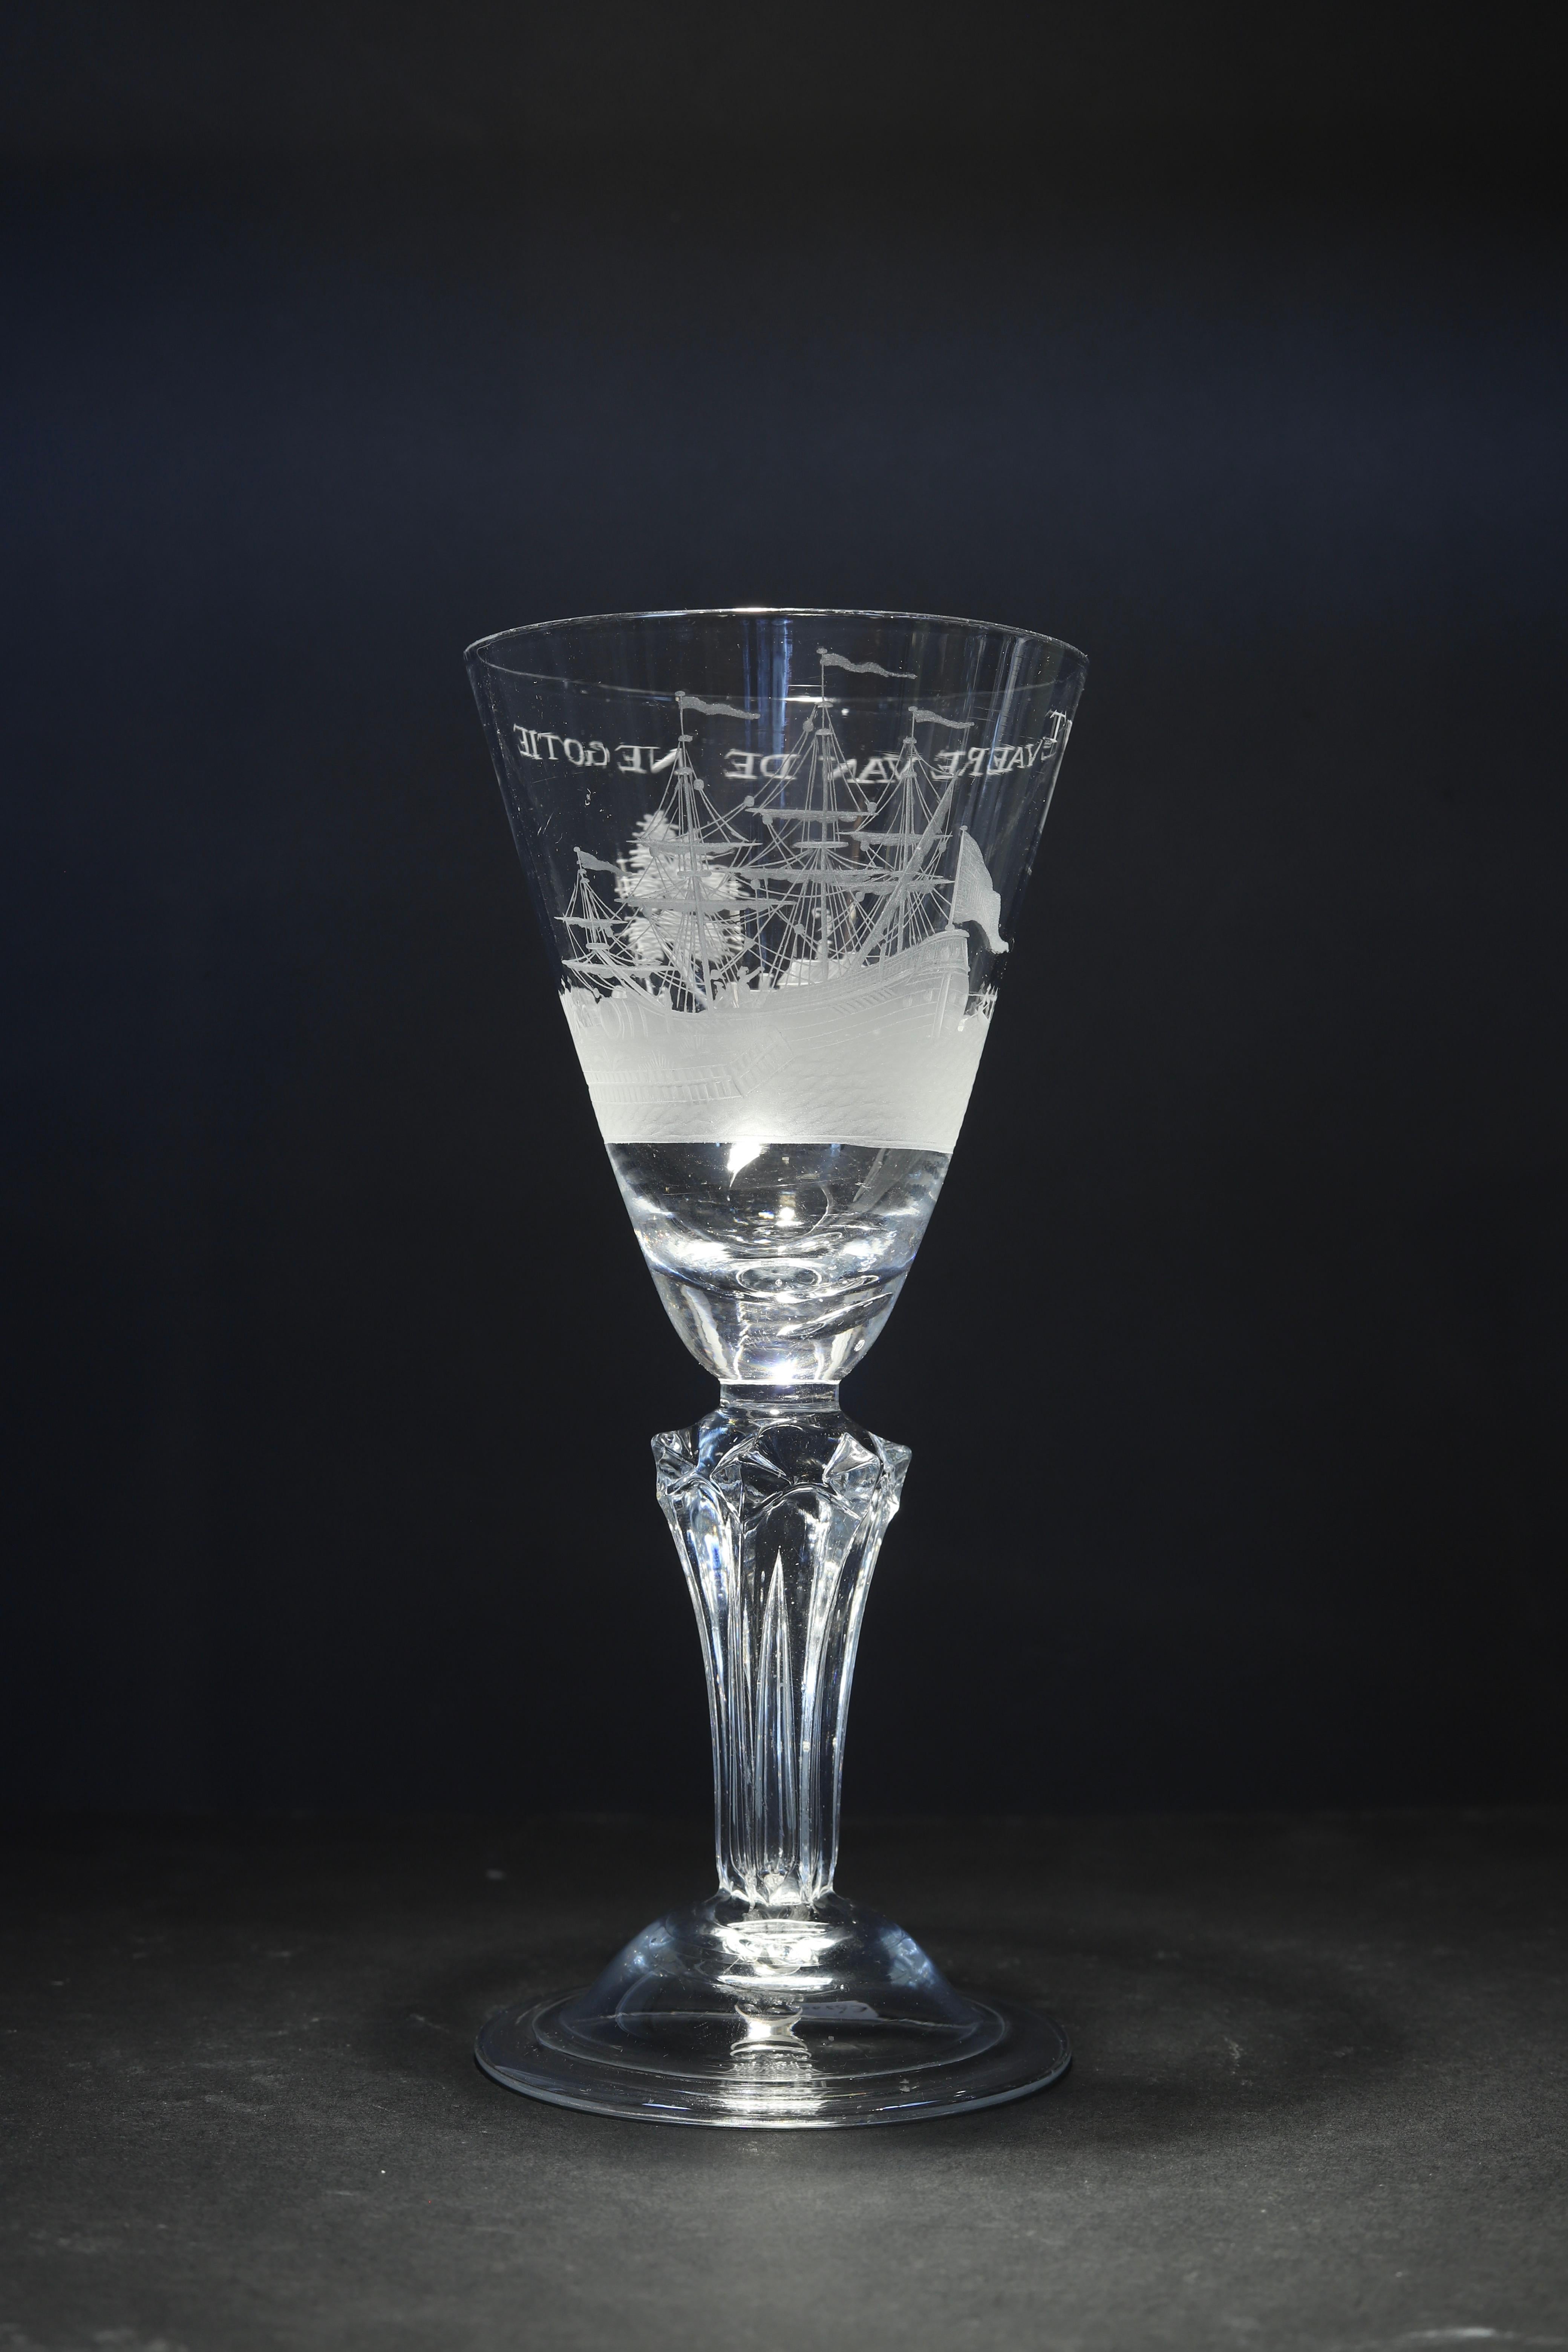 The Netherlands or England
Engraving: Dutch
Circa 1730 - 1740

An exceptional fine Dutch engraved moulded stem wine glass, with a pointed round funnel bowl with a solid base enclosing a tear, decorated with a continuous harbor scene depicting a